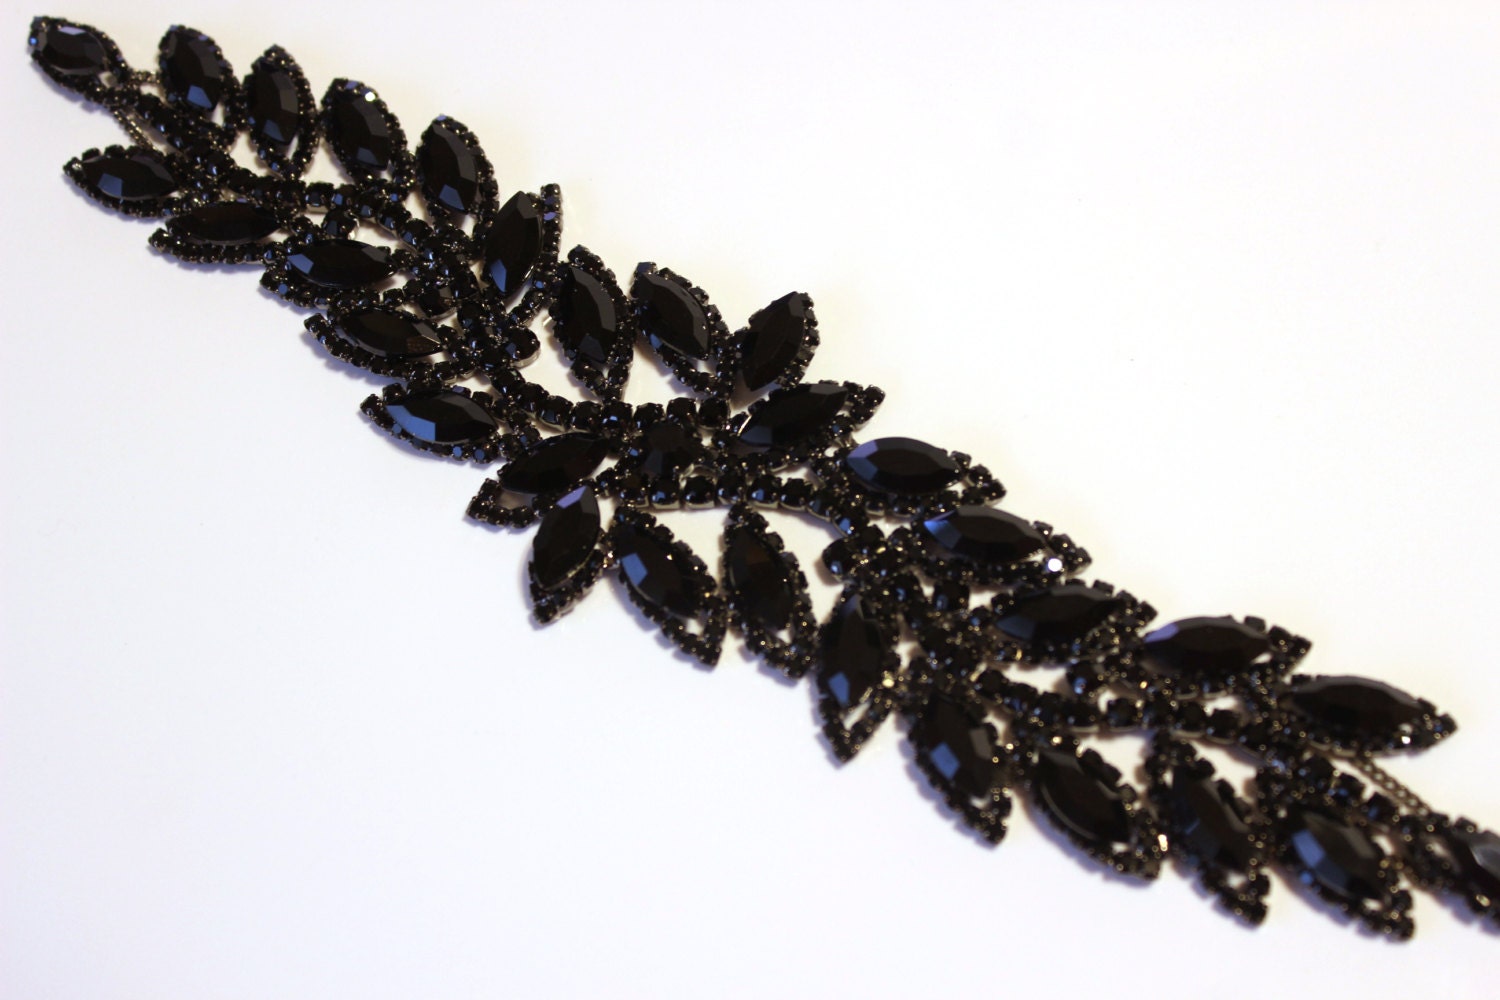 RHS-TRM-1801-BLACKBLACK. Exquisite Black Crystals and Black Beads Trim For  Bridal Sash - Hot Fix or Sew On - 2.25 Inch